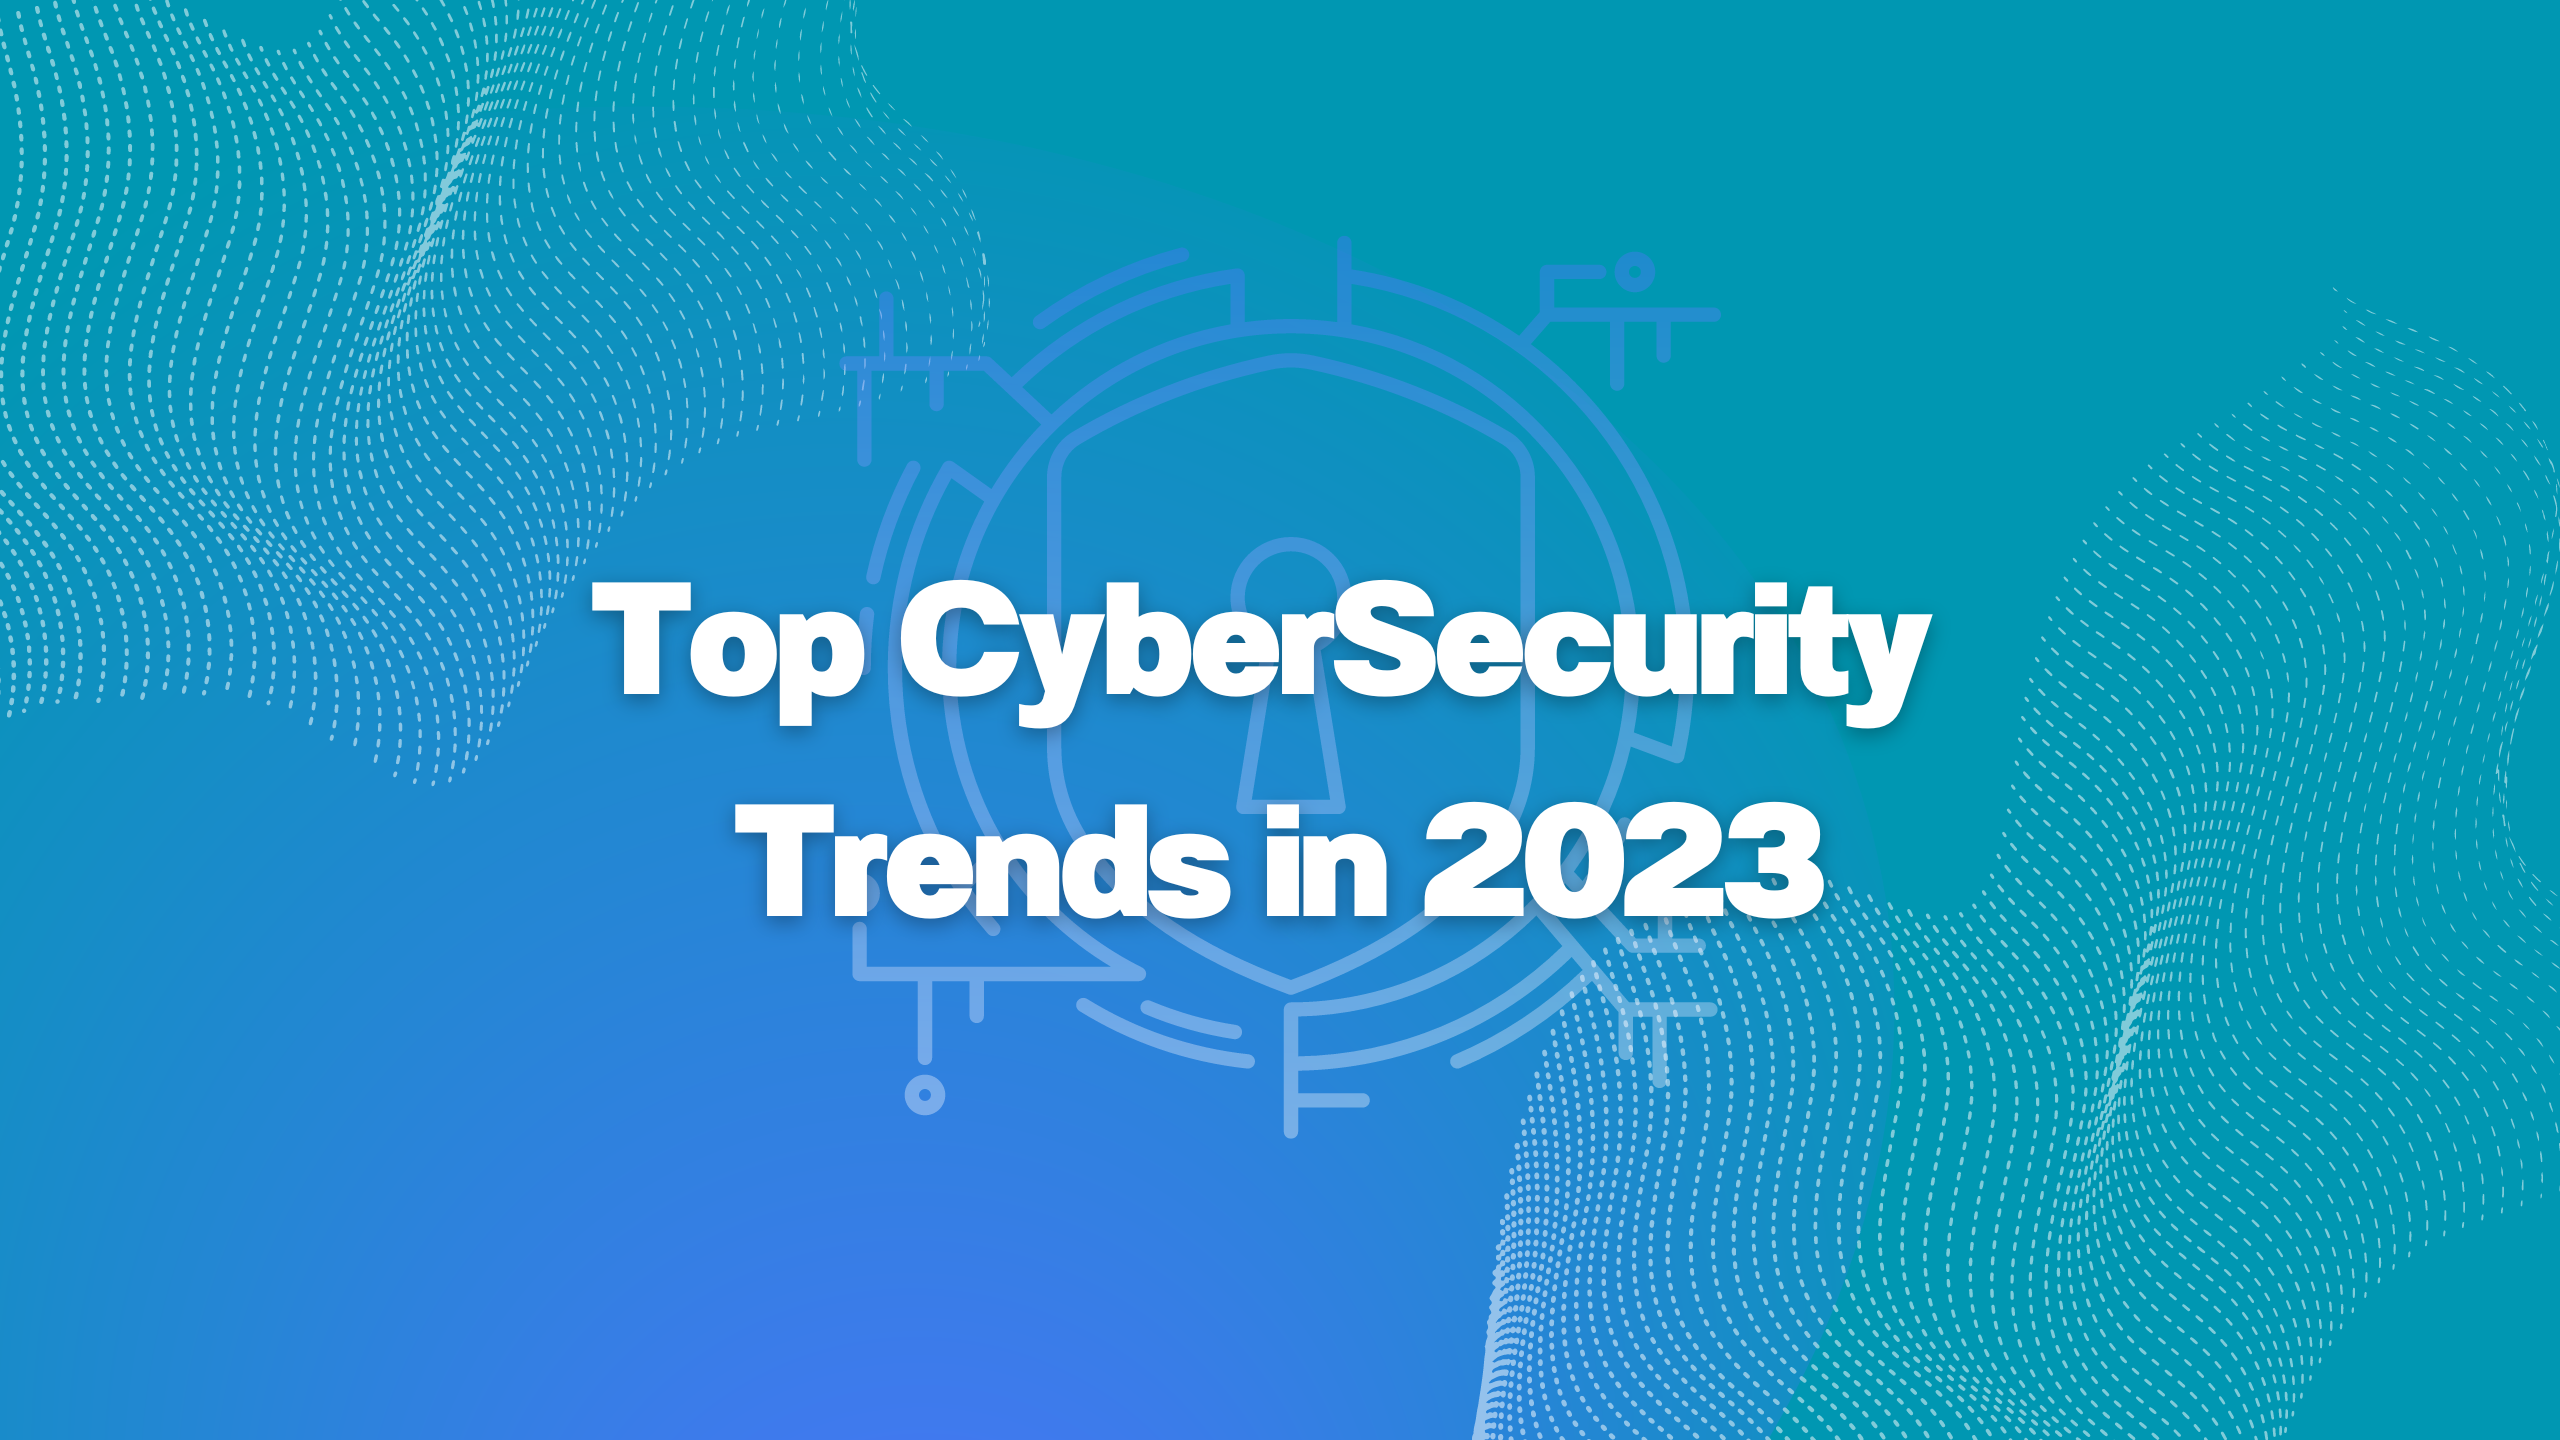 Top CyberSecurity Trends To Pay Attention to in 2023